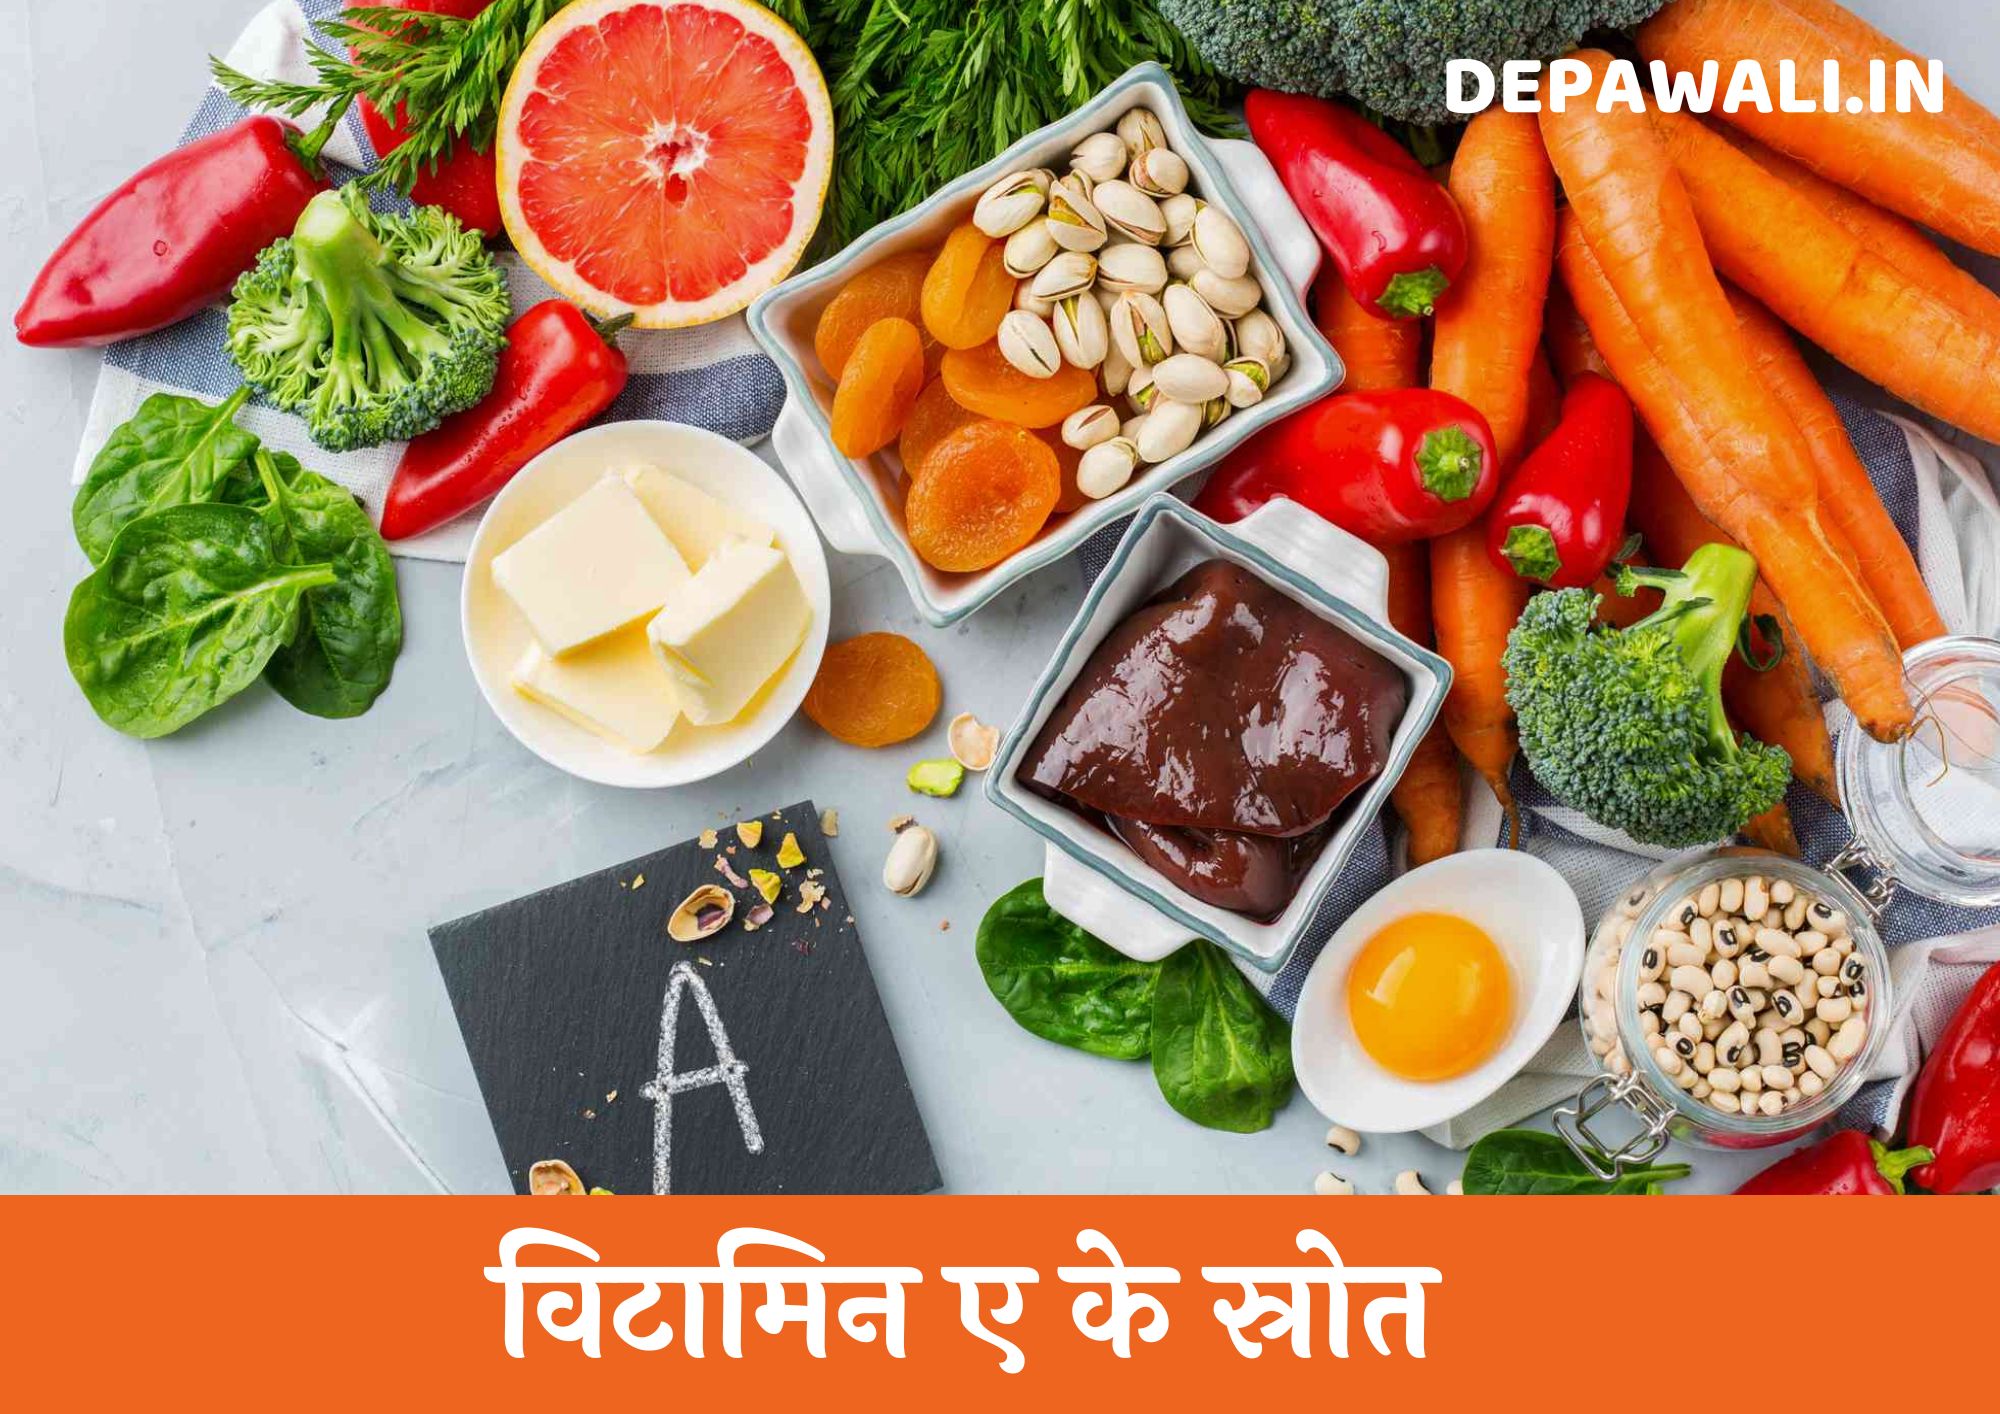 विटामिन ए के स्रोत - (Sources Of Vitamin A In Hindi) - Vitamin A Foods In Hindi - Vitamin A Sources In Hindi